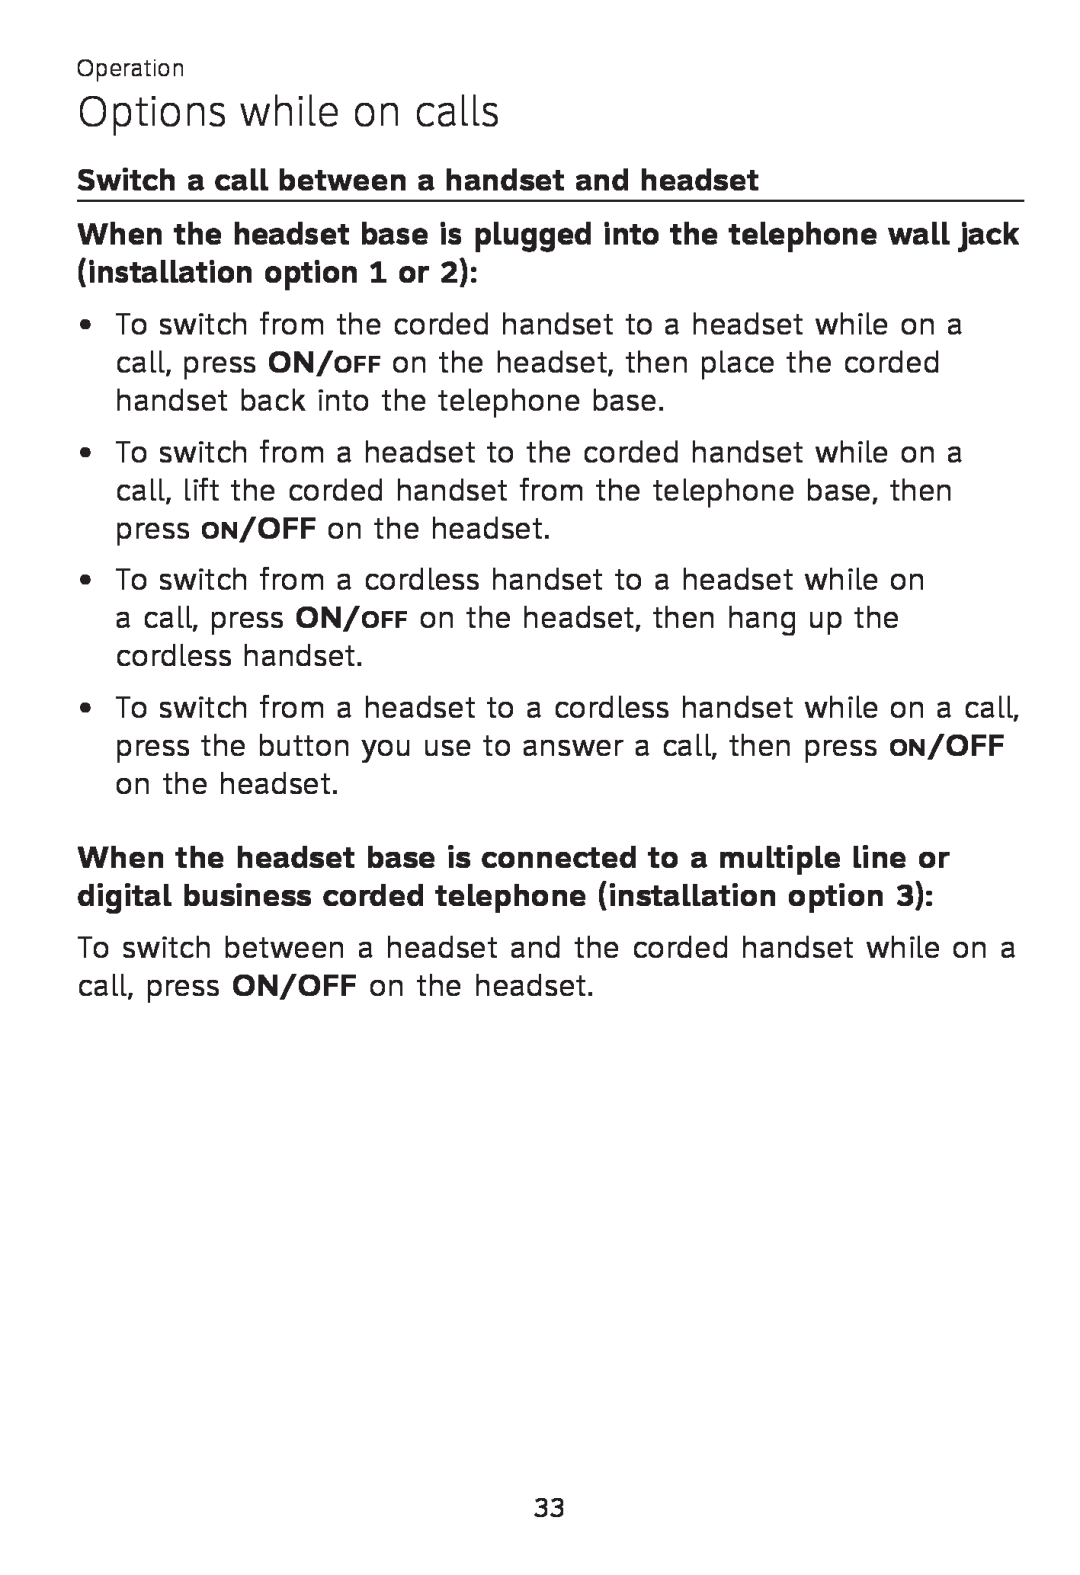 AT&T TL 7610 user manual Switch a call between a handset and headset, Options while on calls 